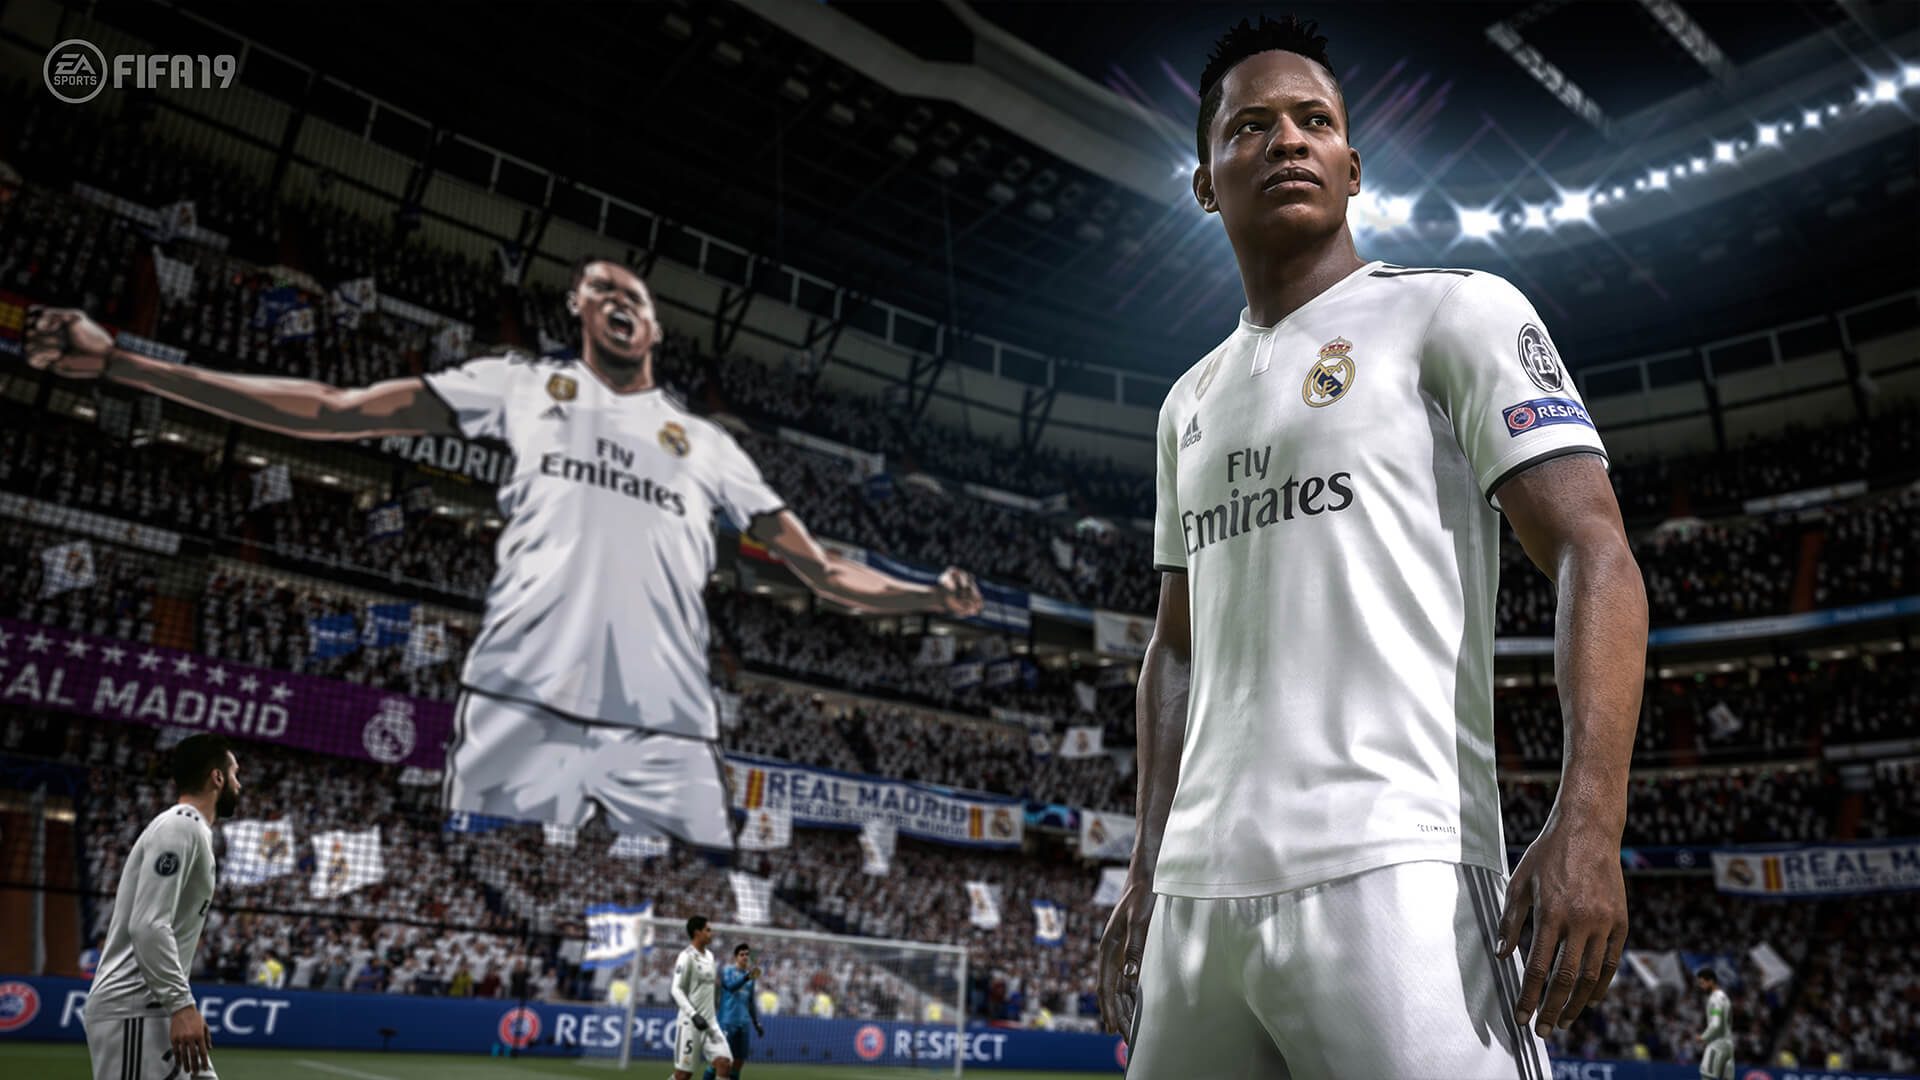 Good news for fans fifa 20